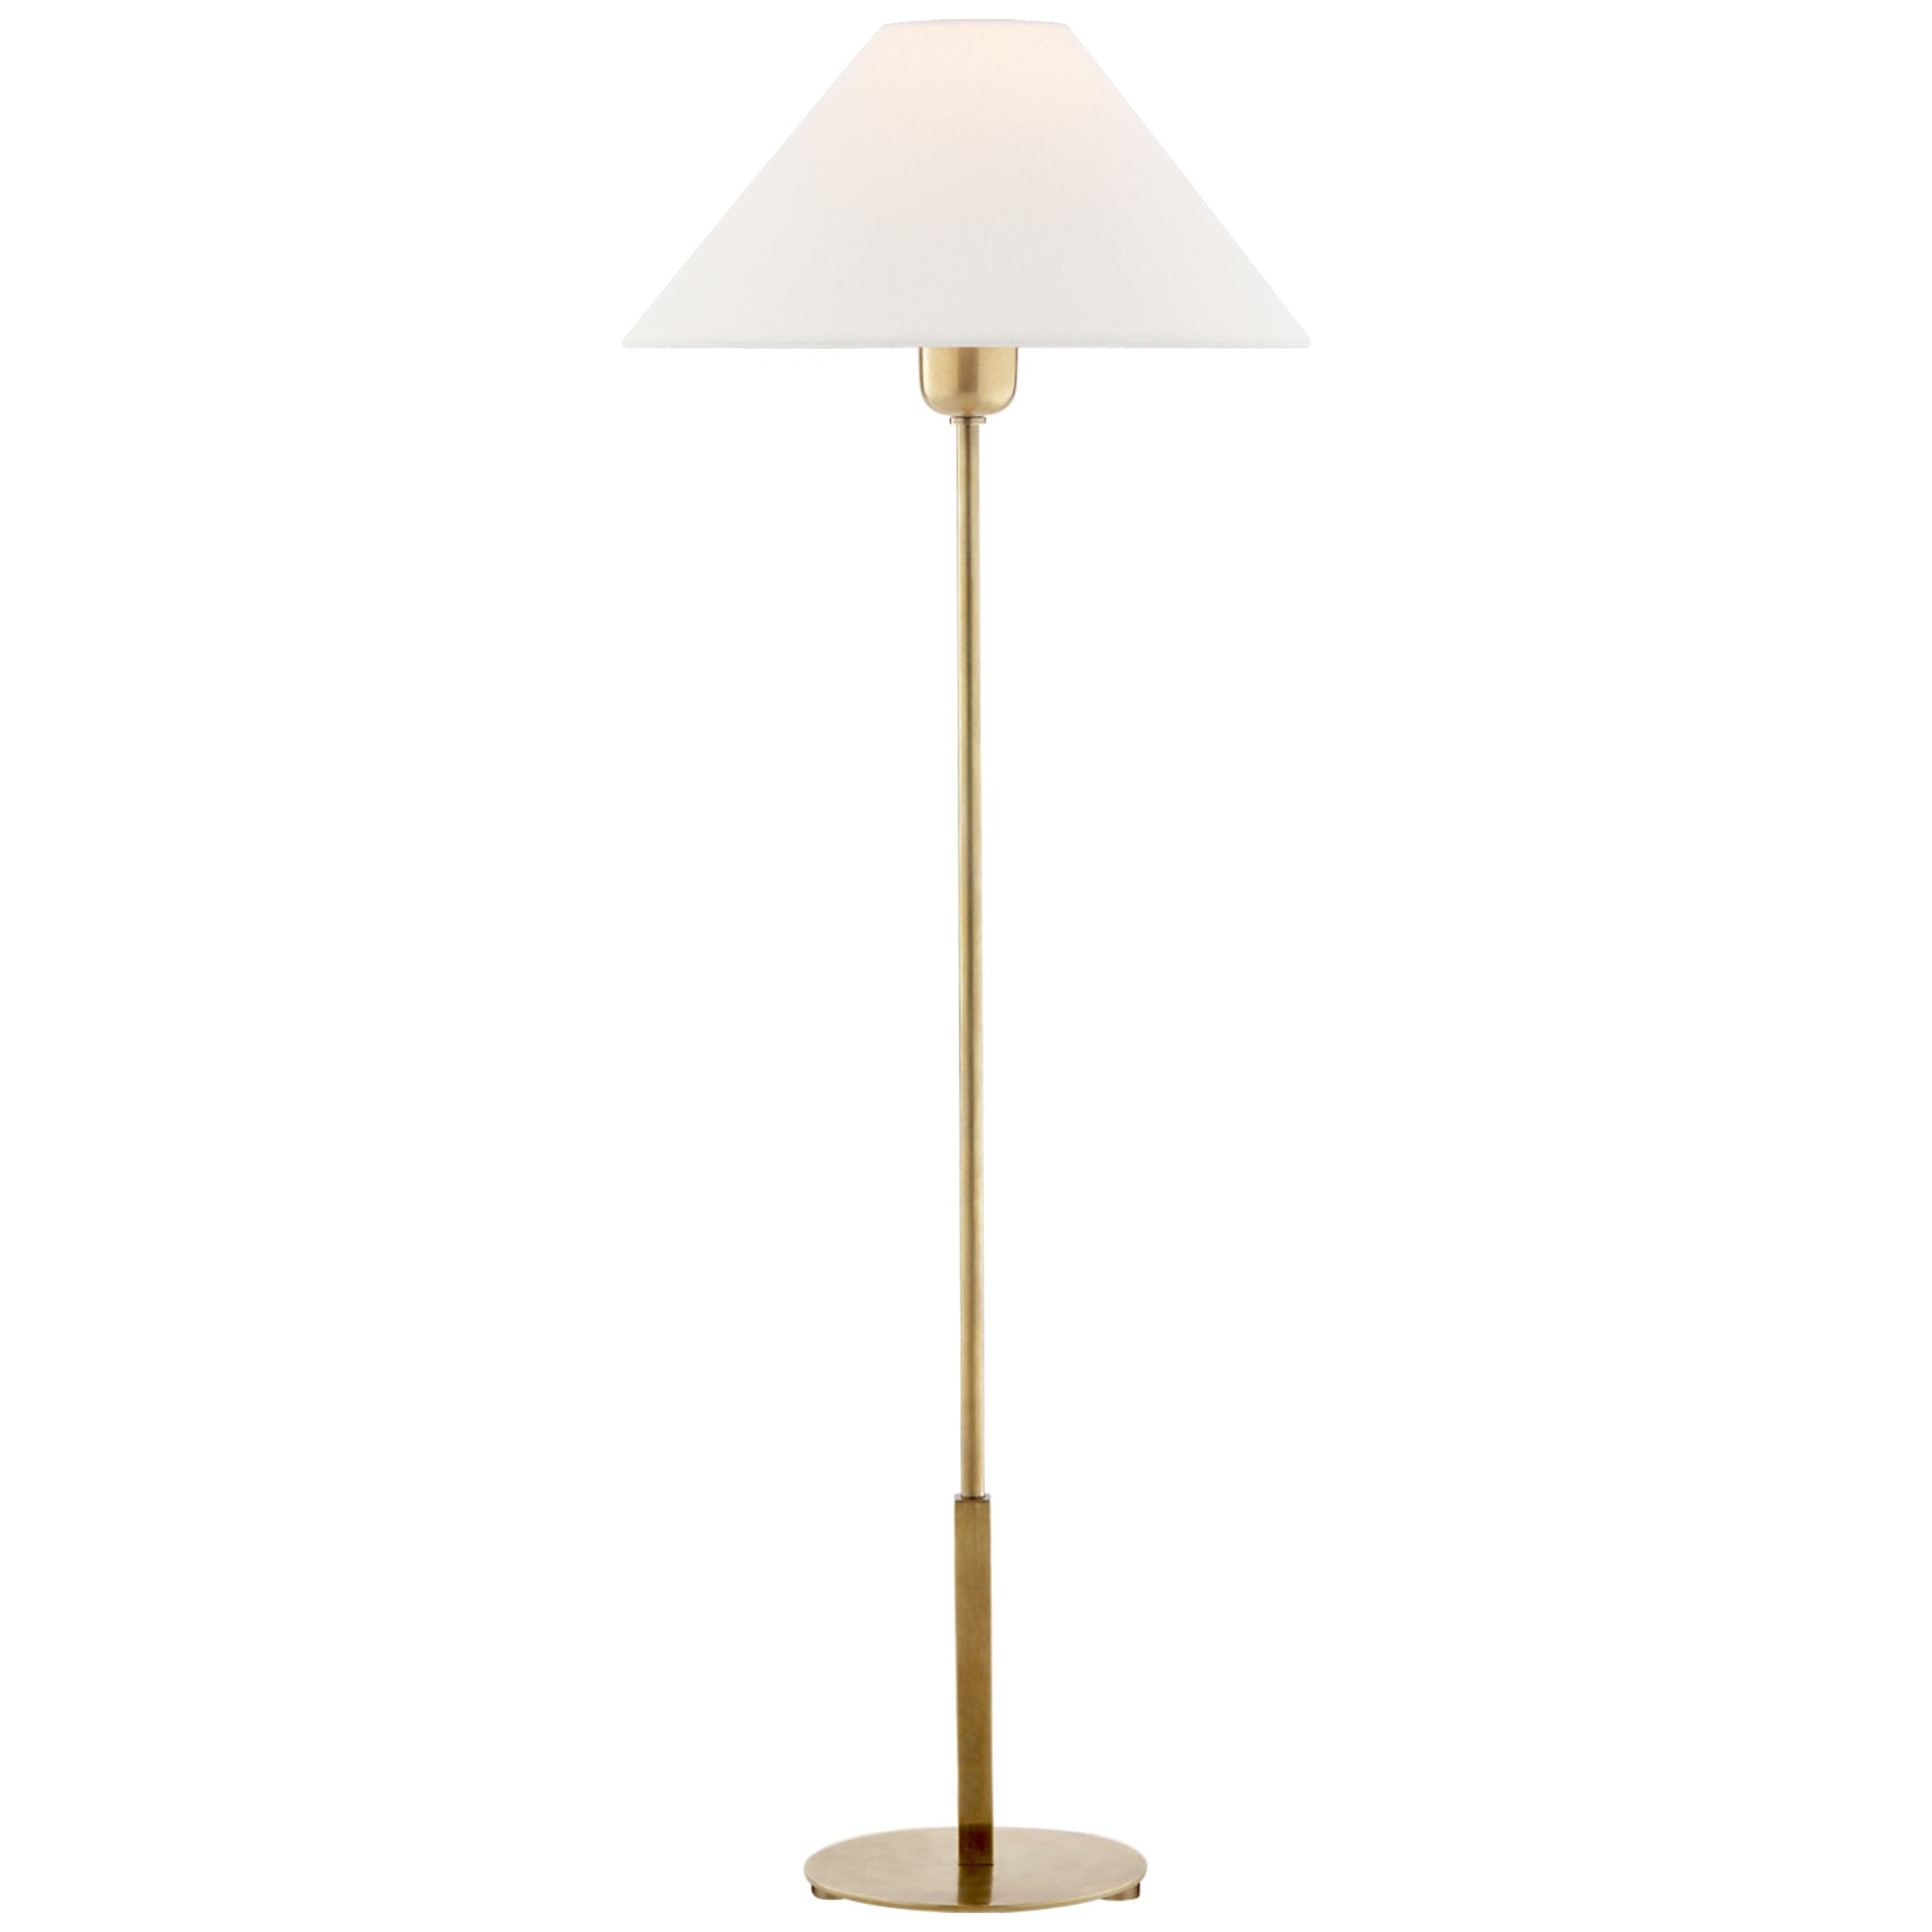 J. Randall Powers Hackney Buffet Lamp in Hand-Rubbed Antique Brass with Linen Shade